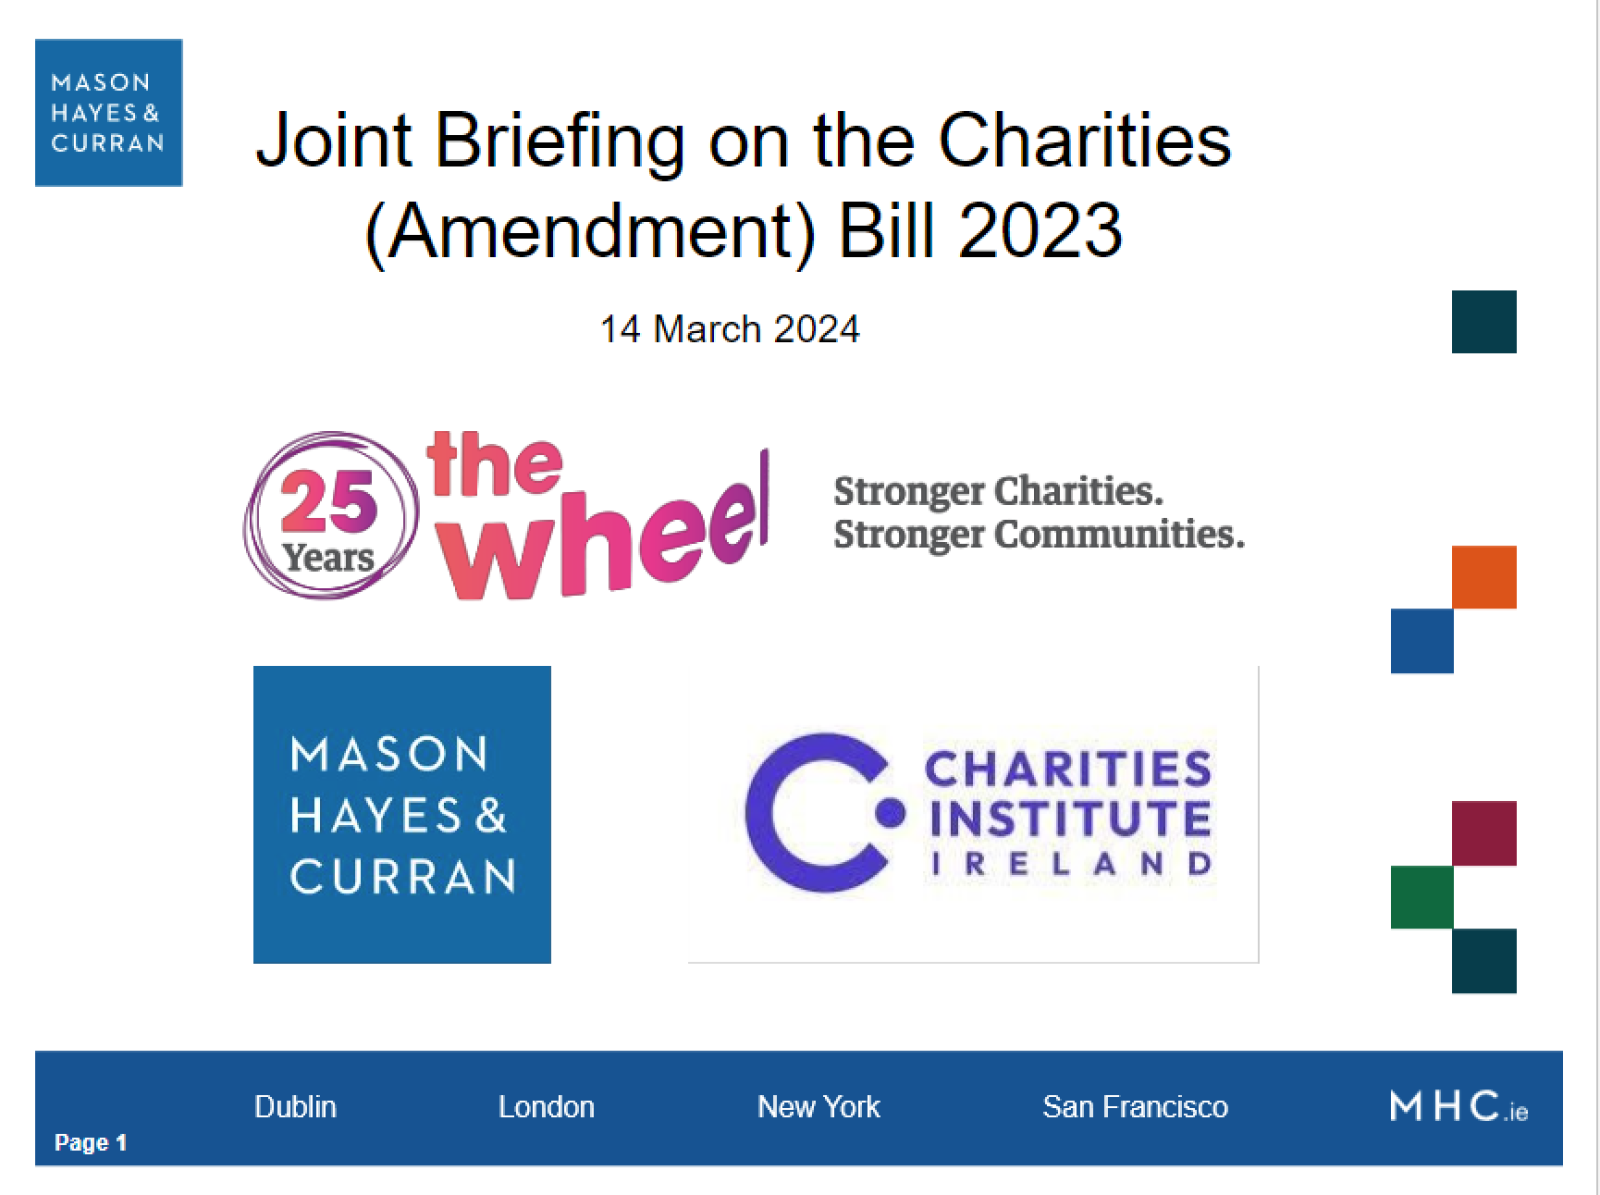 Joint Briefing & Update on the Charities Amendment Bill 14 March 2024